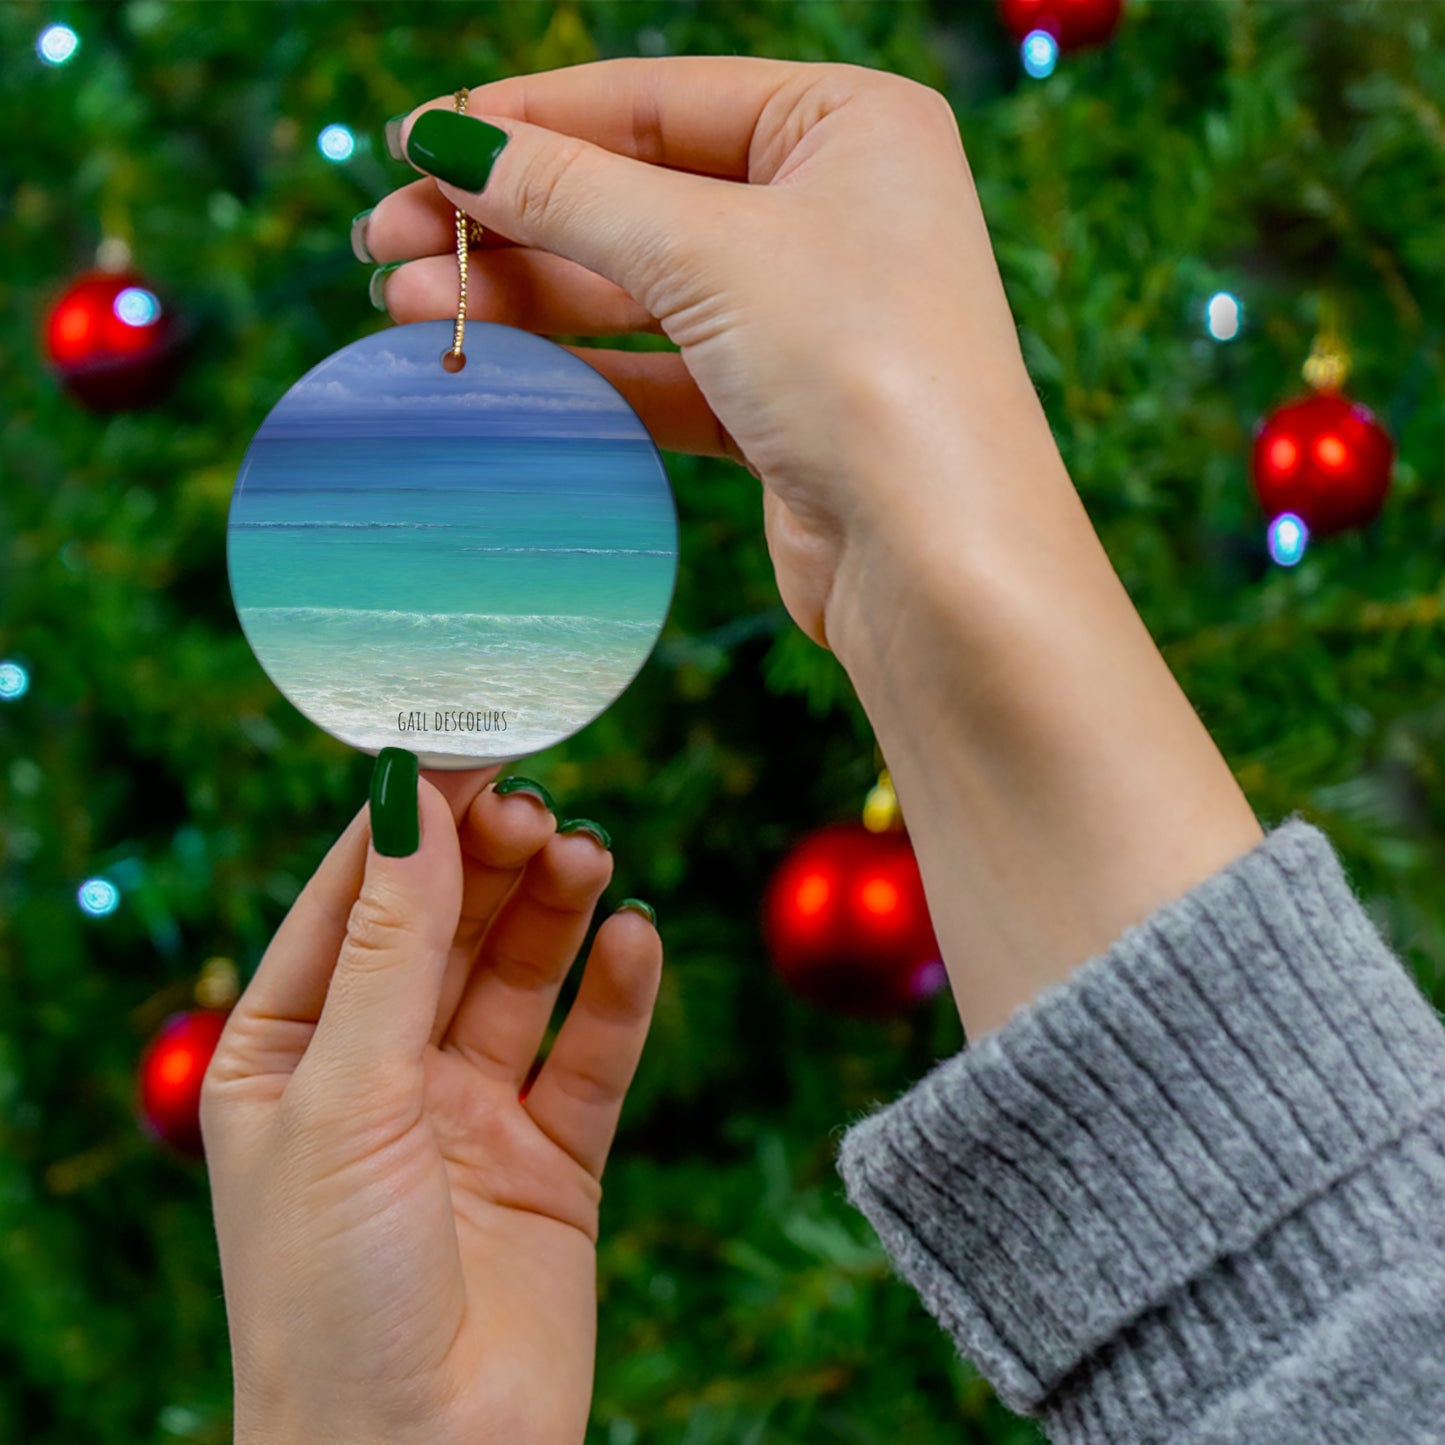 Holiday Ornament - Gail Descoeur's Mysterious Sea